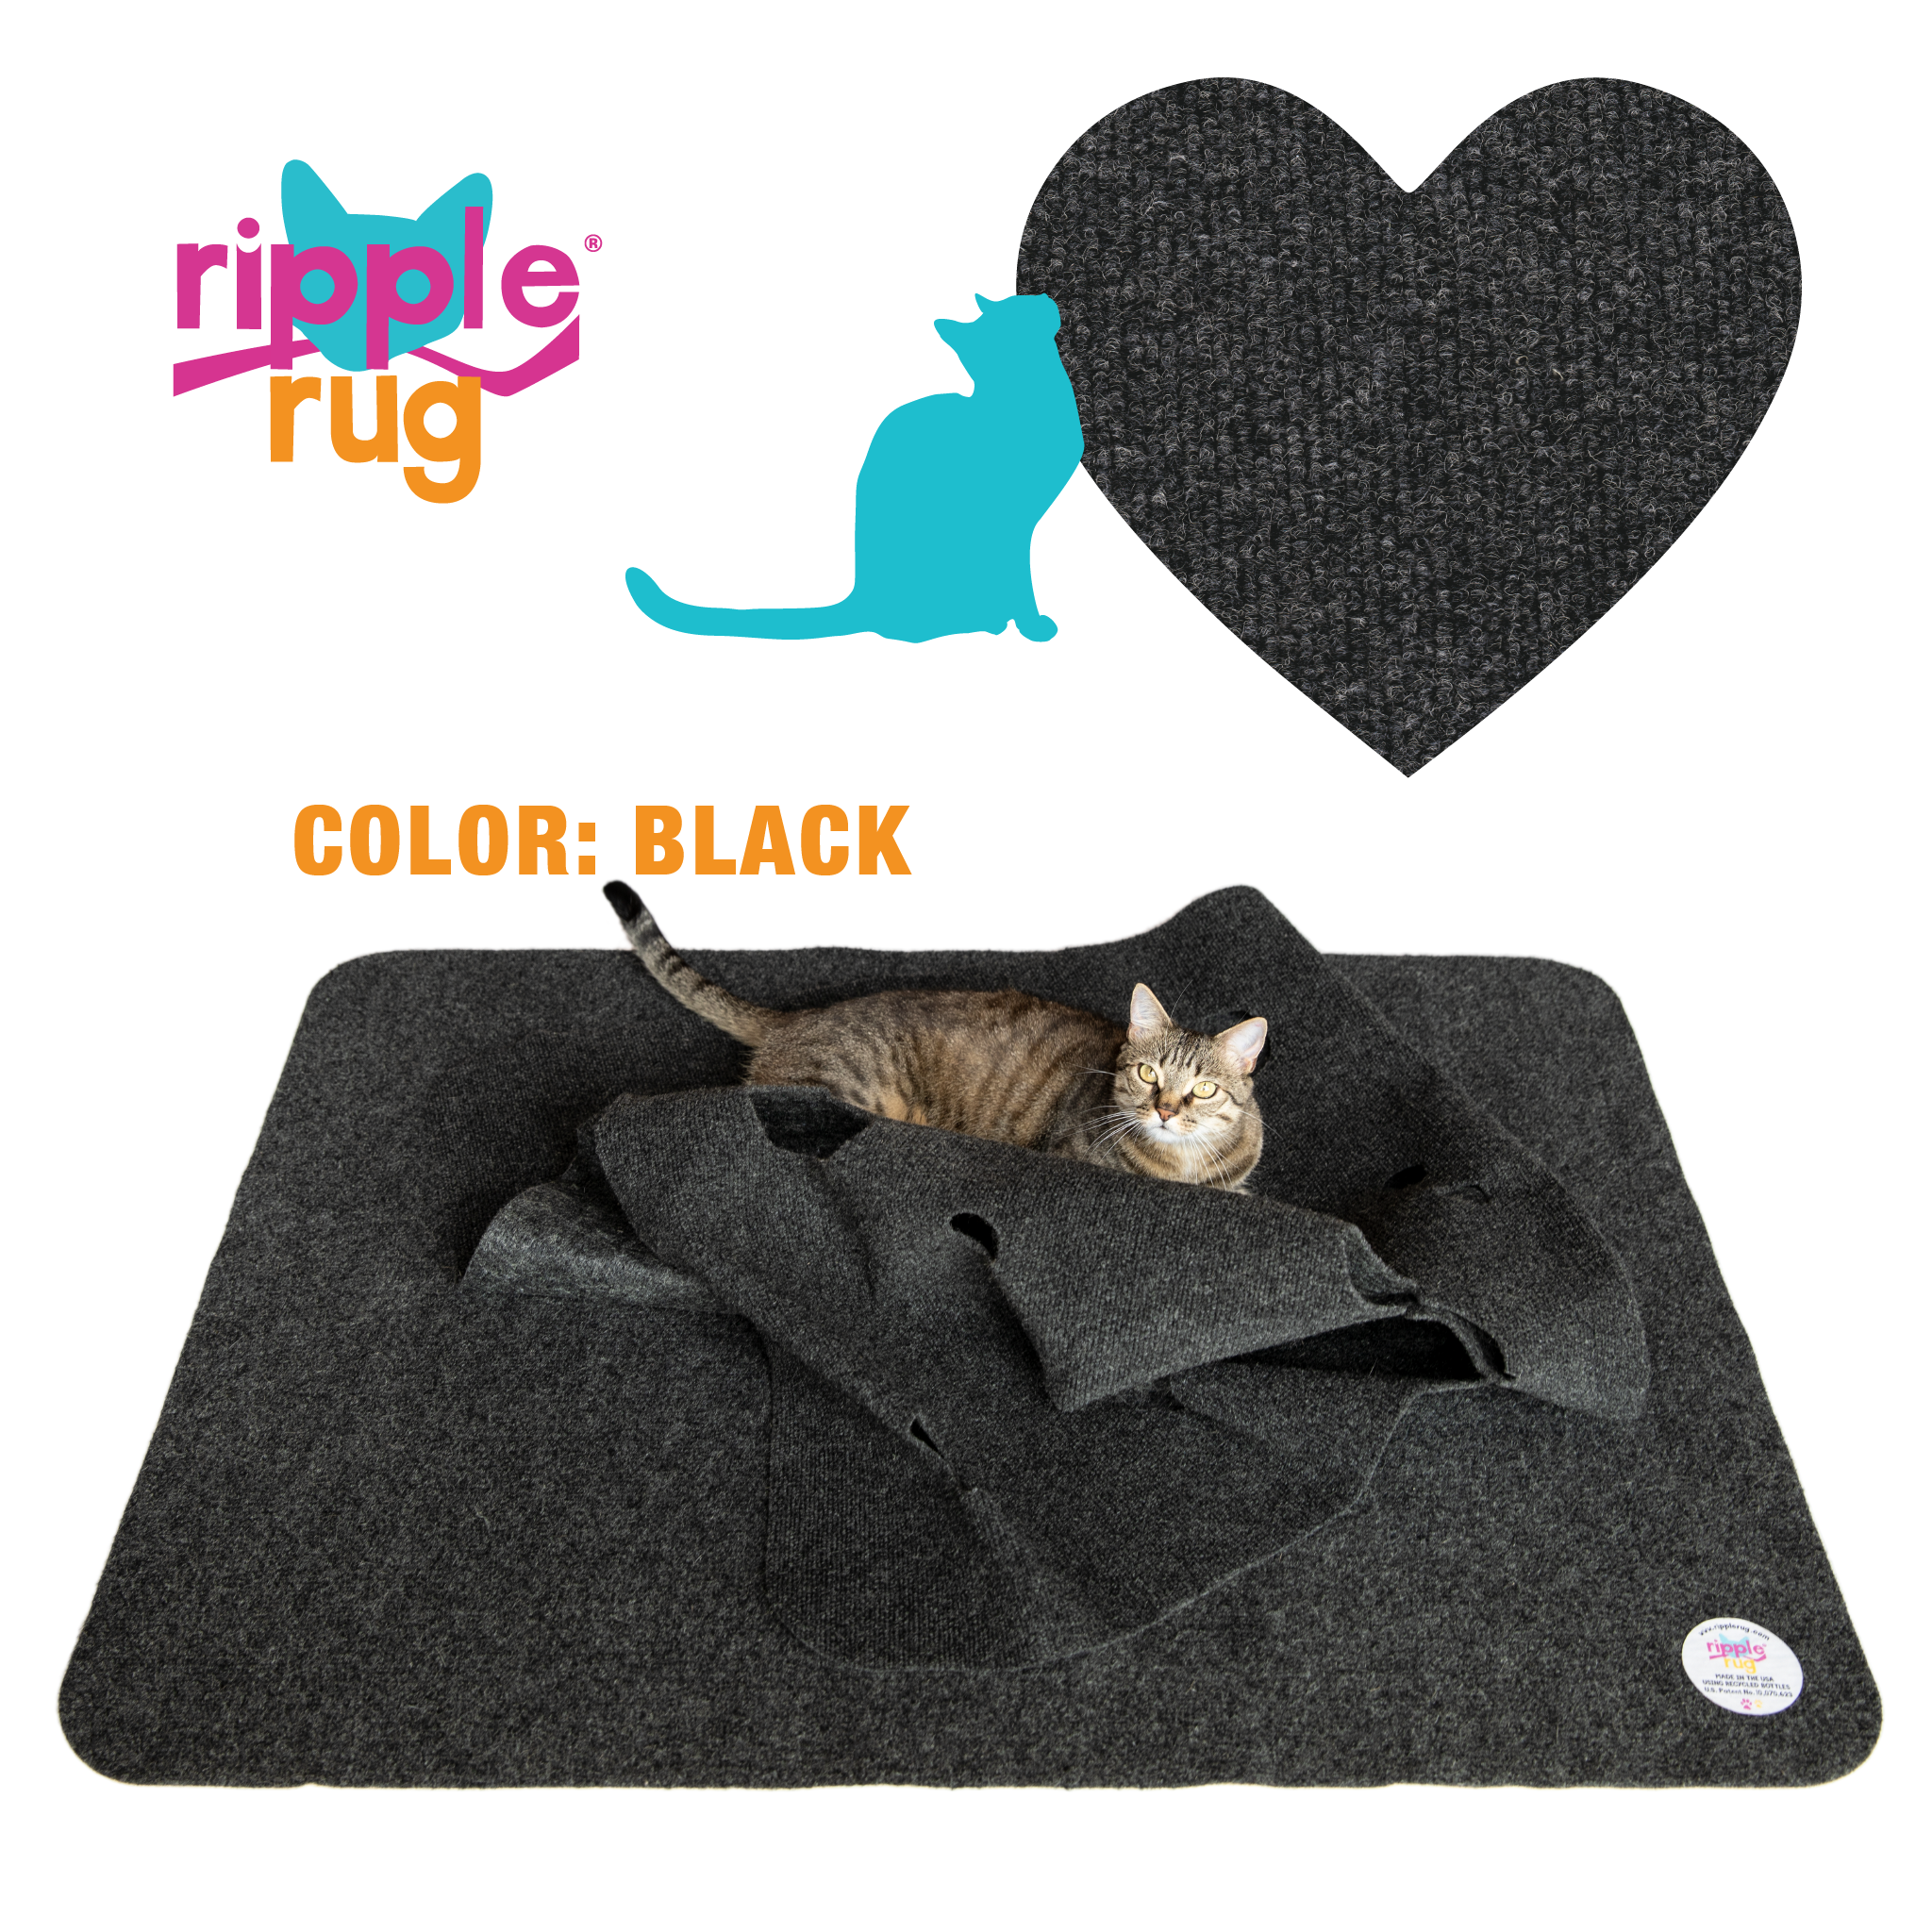 The Ripple Rug Cat Activity Mat Made in USA Fun Interactive Play Training  Scratching Multi Use Habitat and Bed Mat 